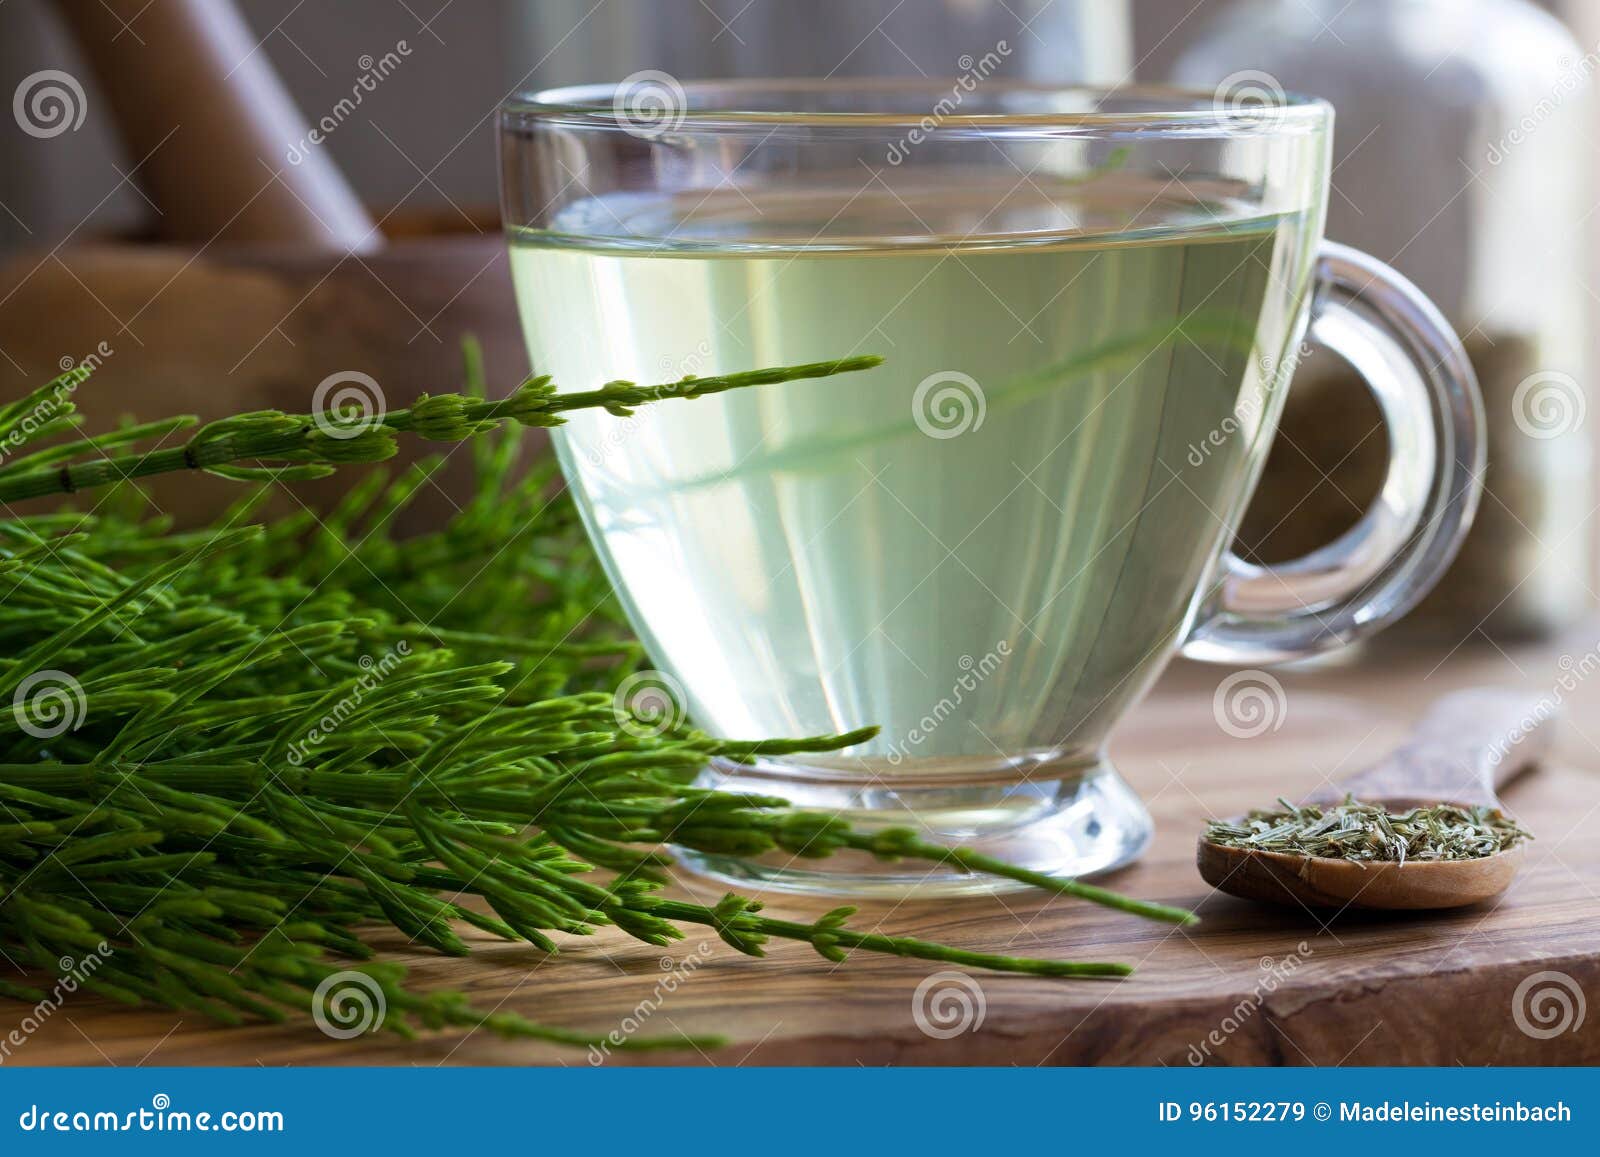 a cup of horsetail tea with fresh and dried horsetail